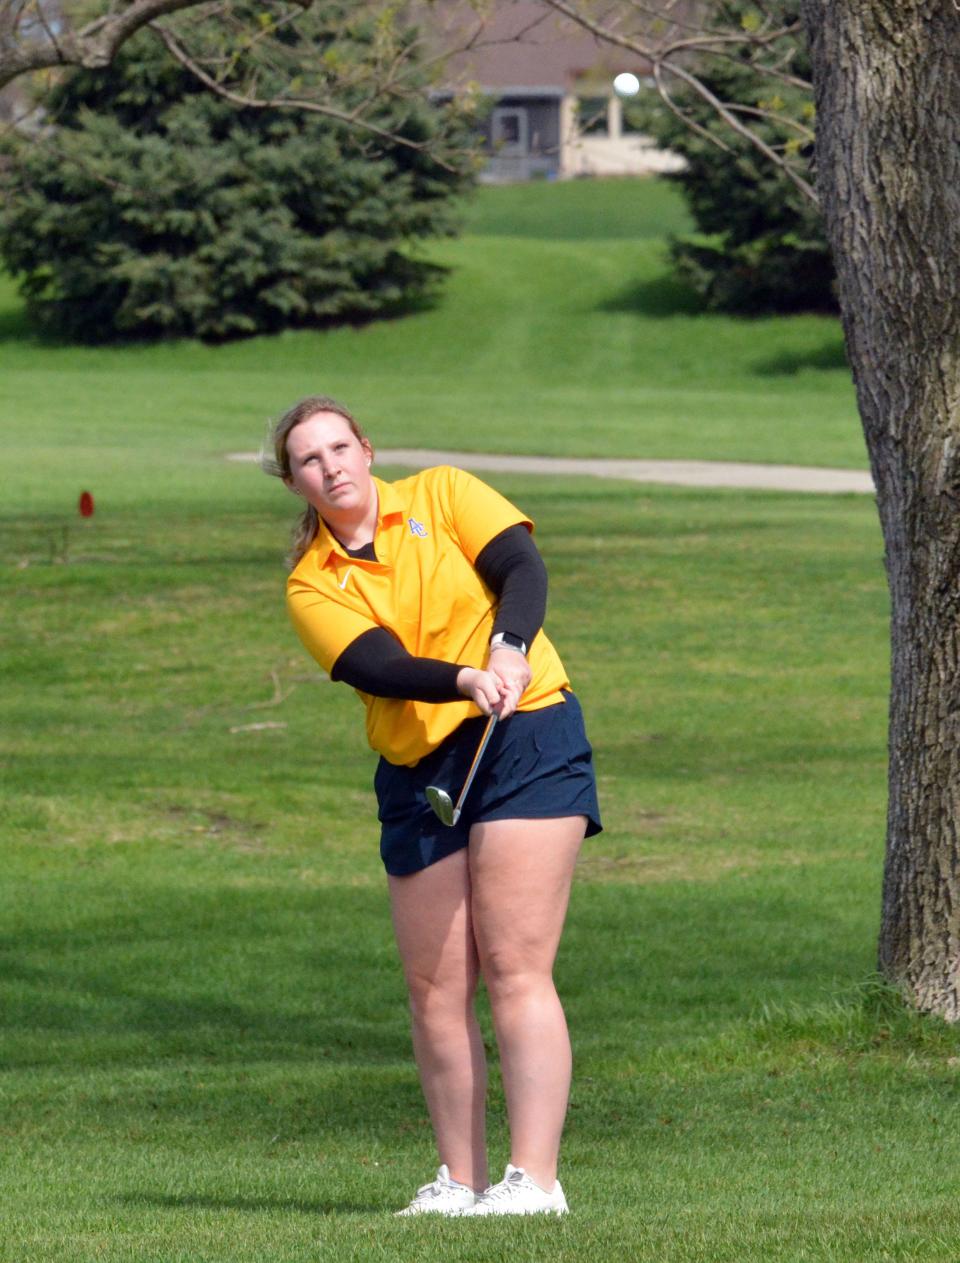 Aberdeen Central's Hayley Wirebaugh hits to No. 1 Yellow earlier this season during the Watertown Girls Golf Invitational at Cattail Crossing Golf Course.